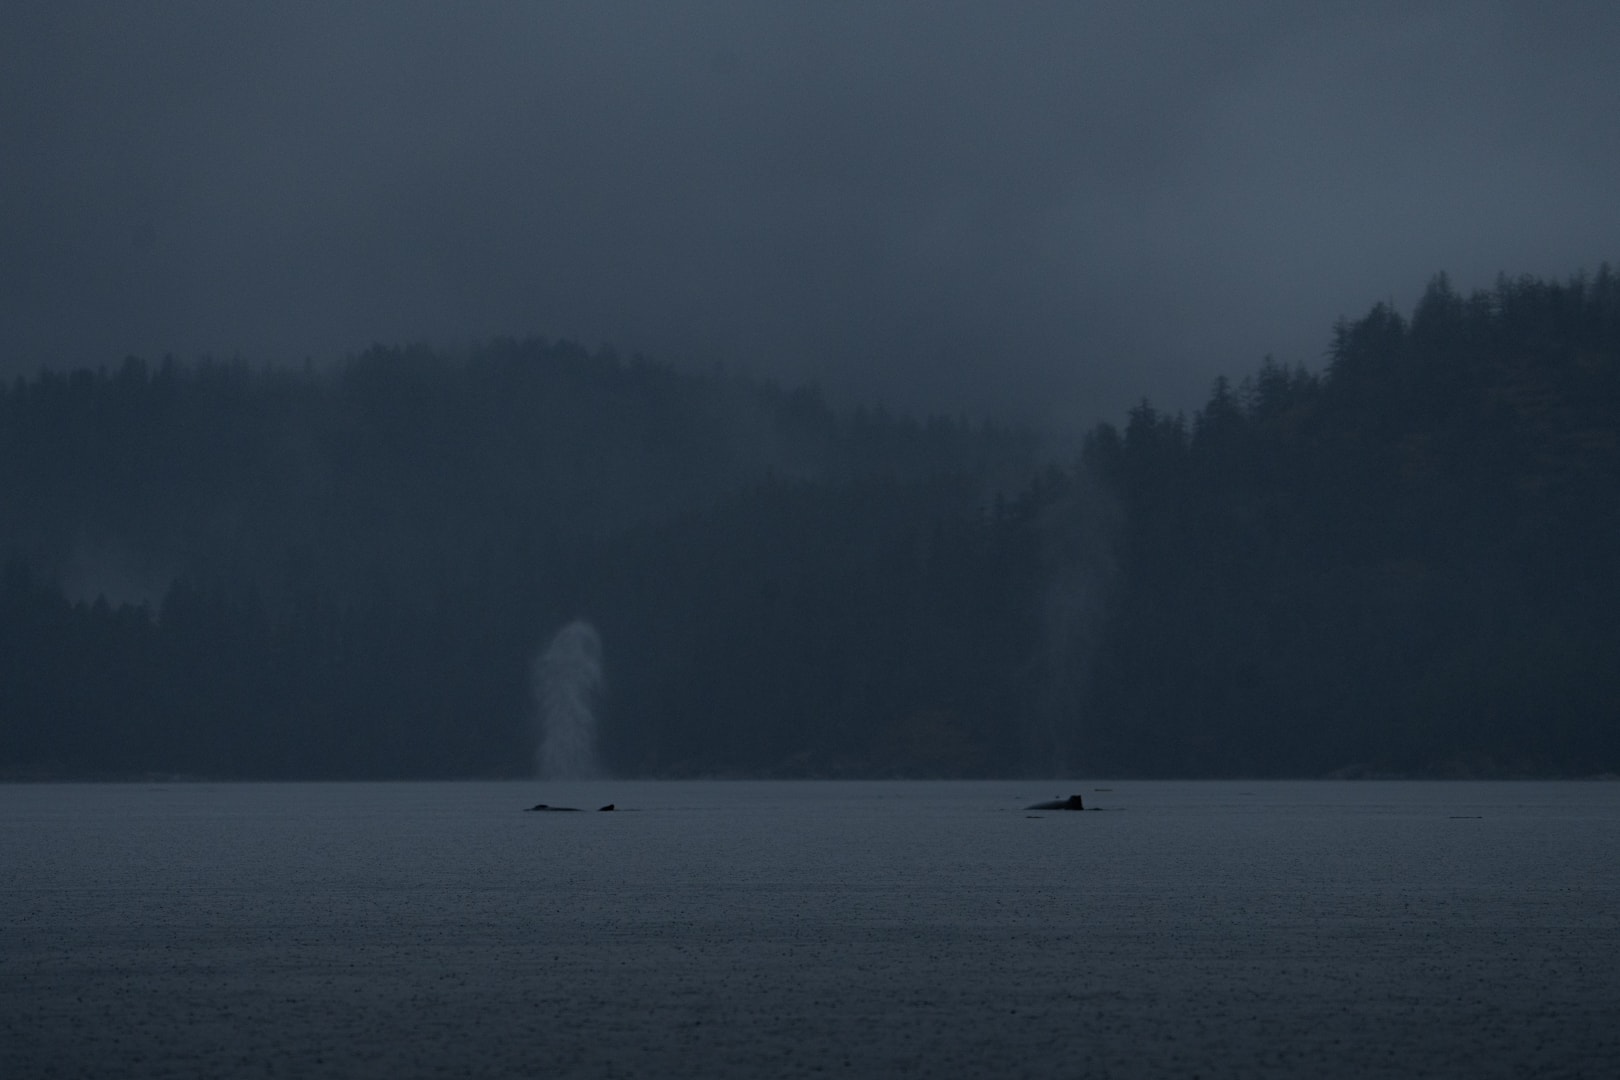 two humpback whales surfacing on a gray rainy backdrop